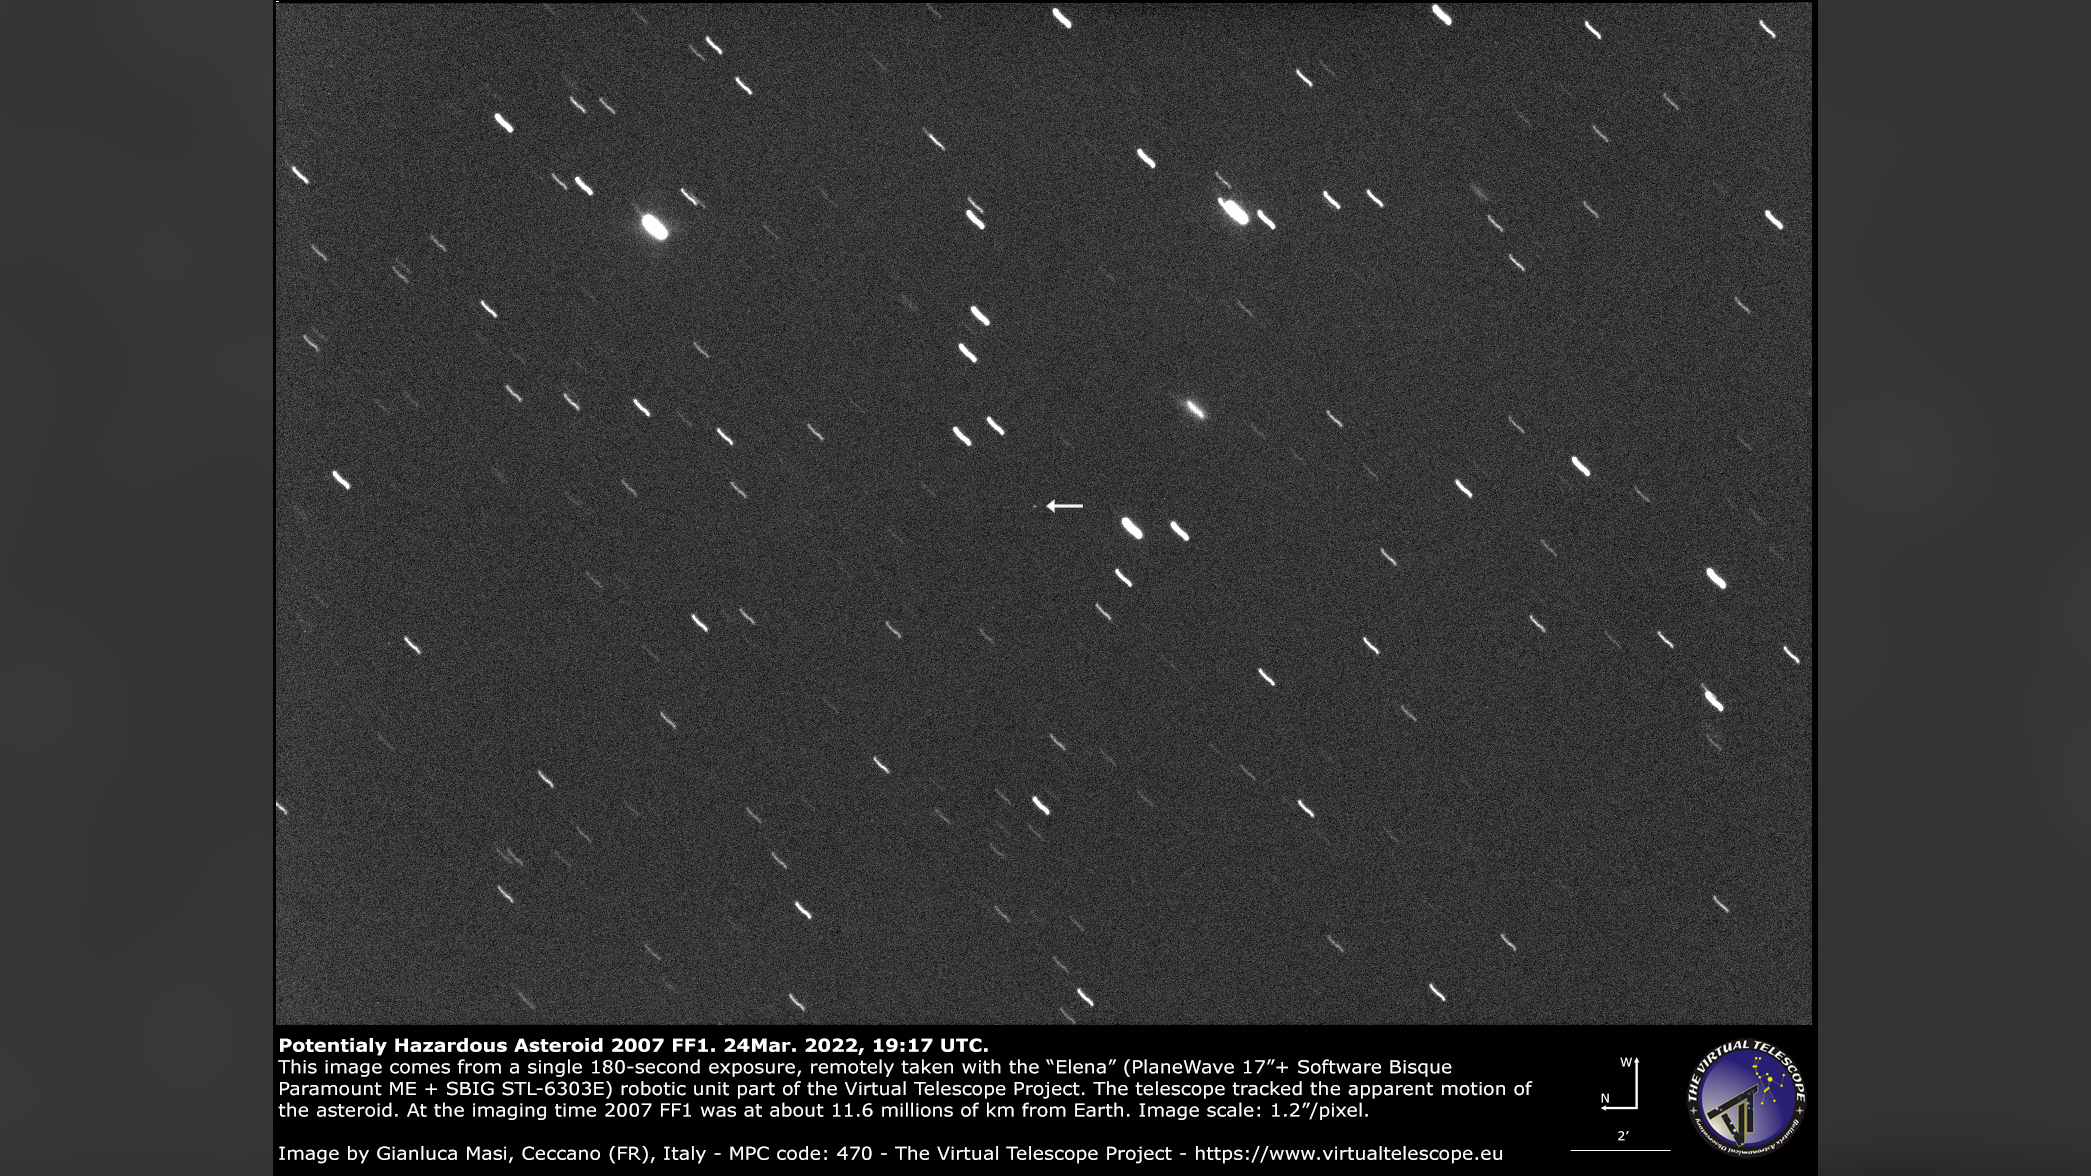 The Virtual Telescope captured this image of the potentially hazardous asteroid 2007 FF1 on March 24, 2022.